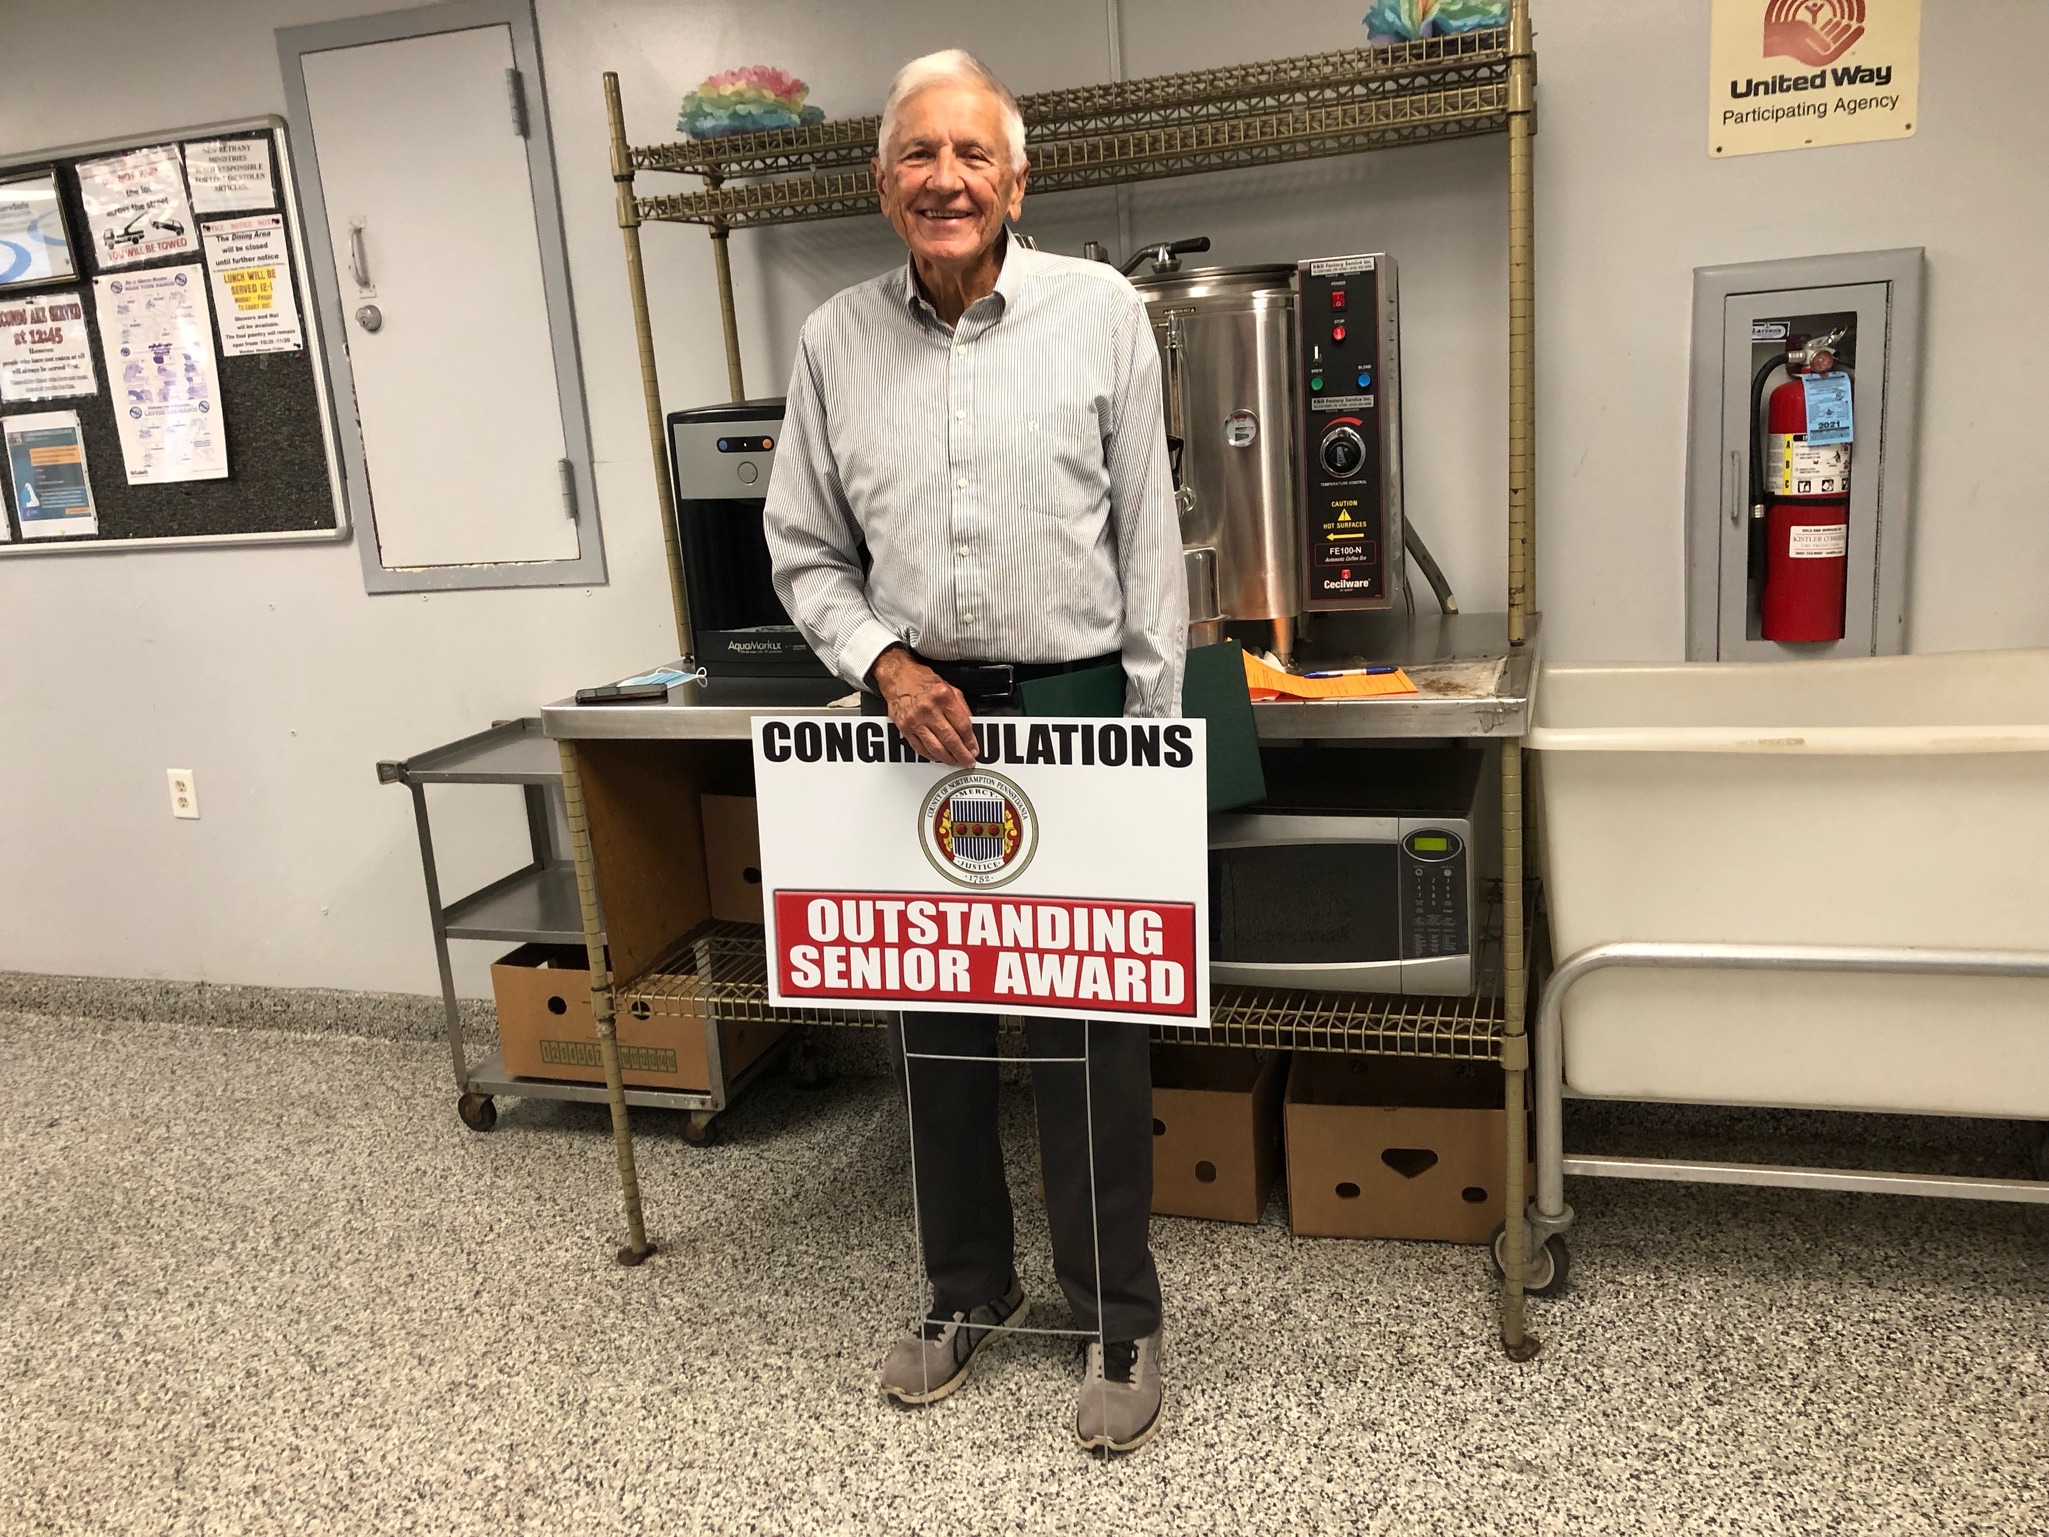 Dr. Eugene Witiak with sign that reads "Congratulations: Outstanding Senior Award"